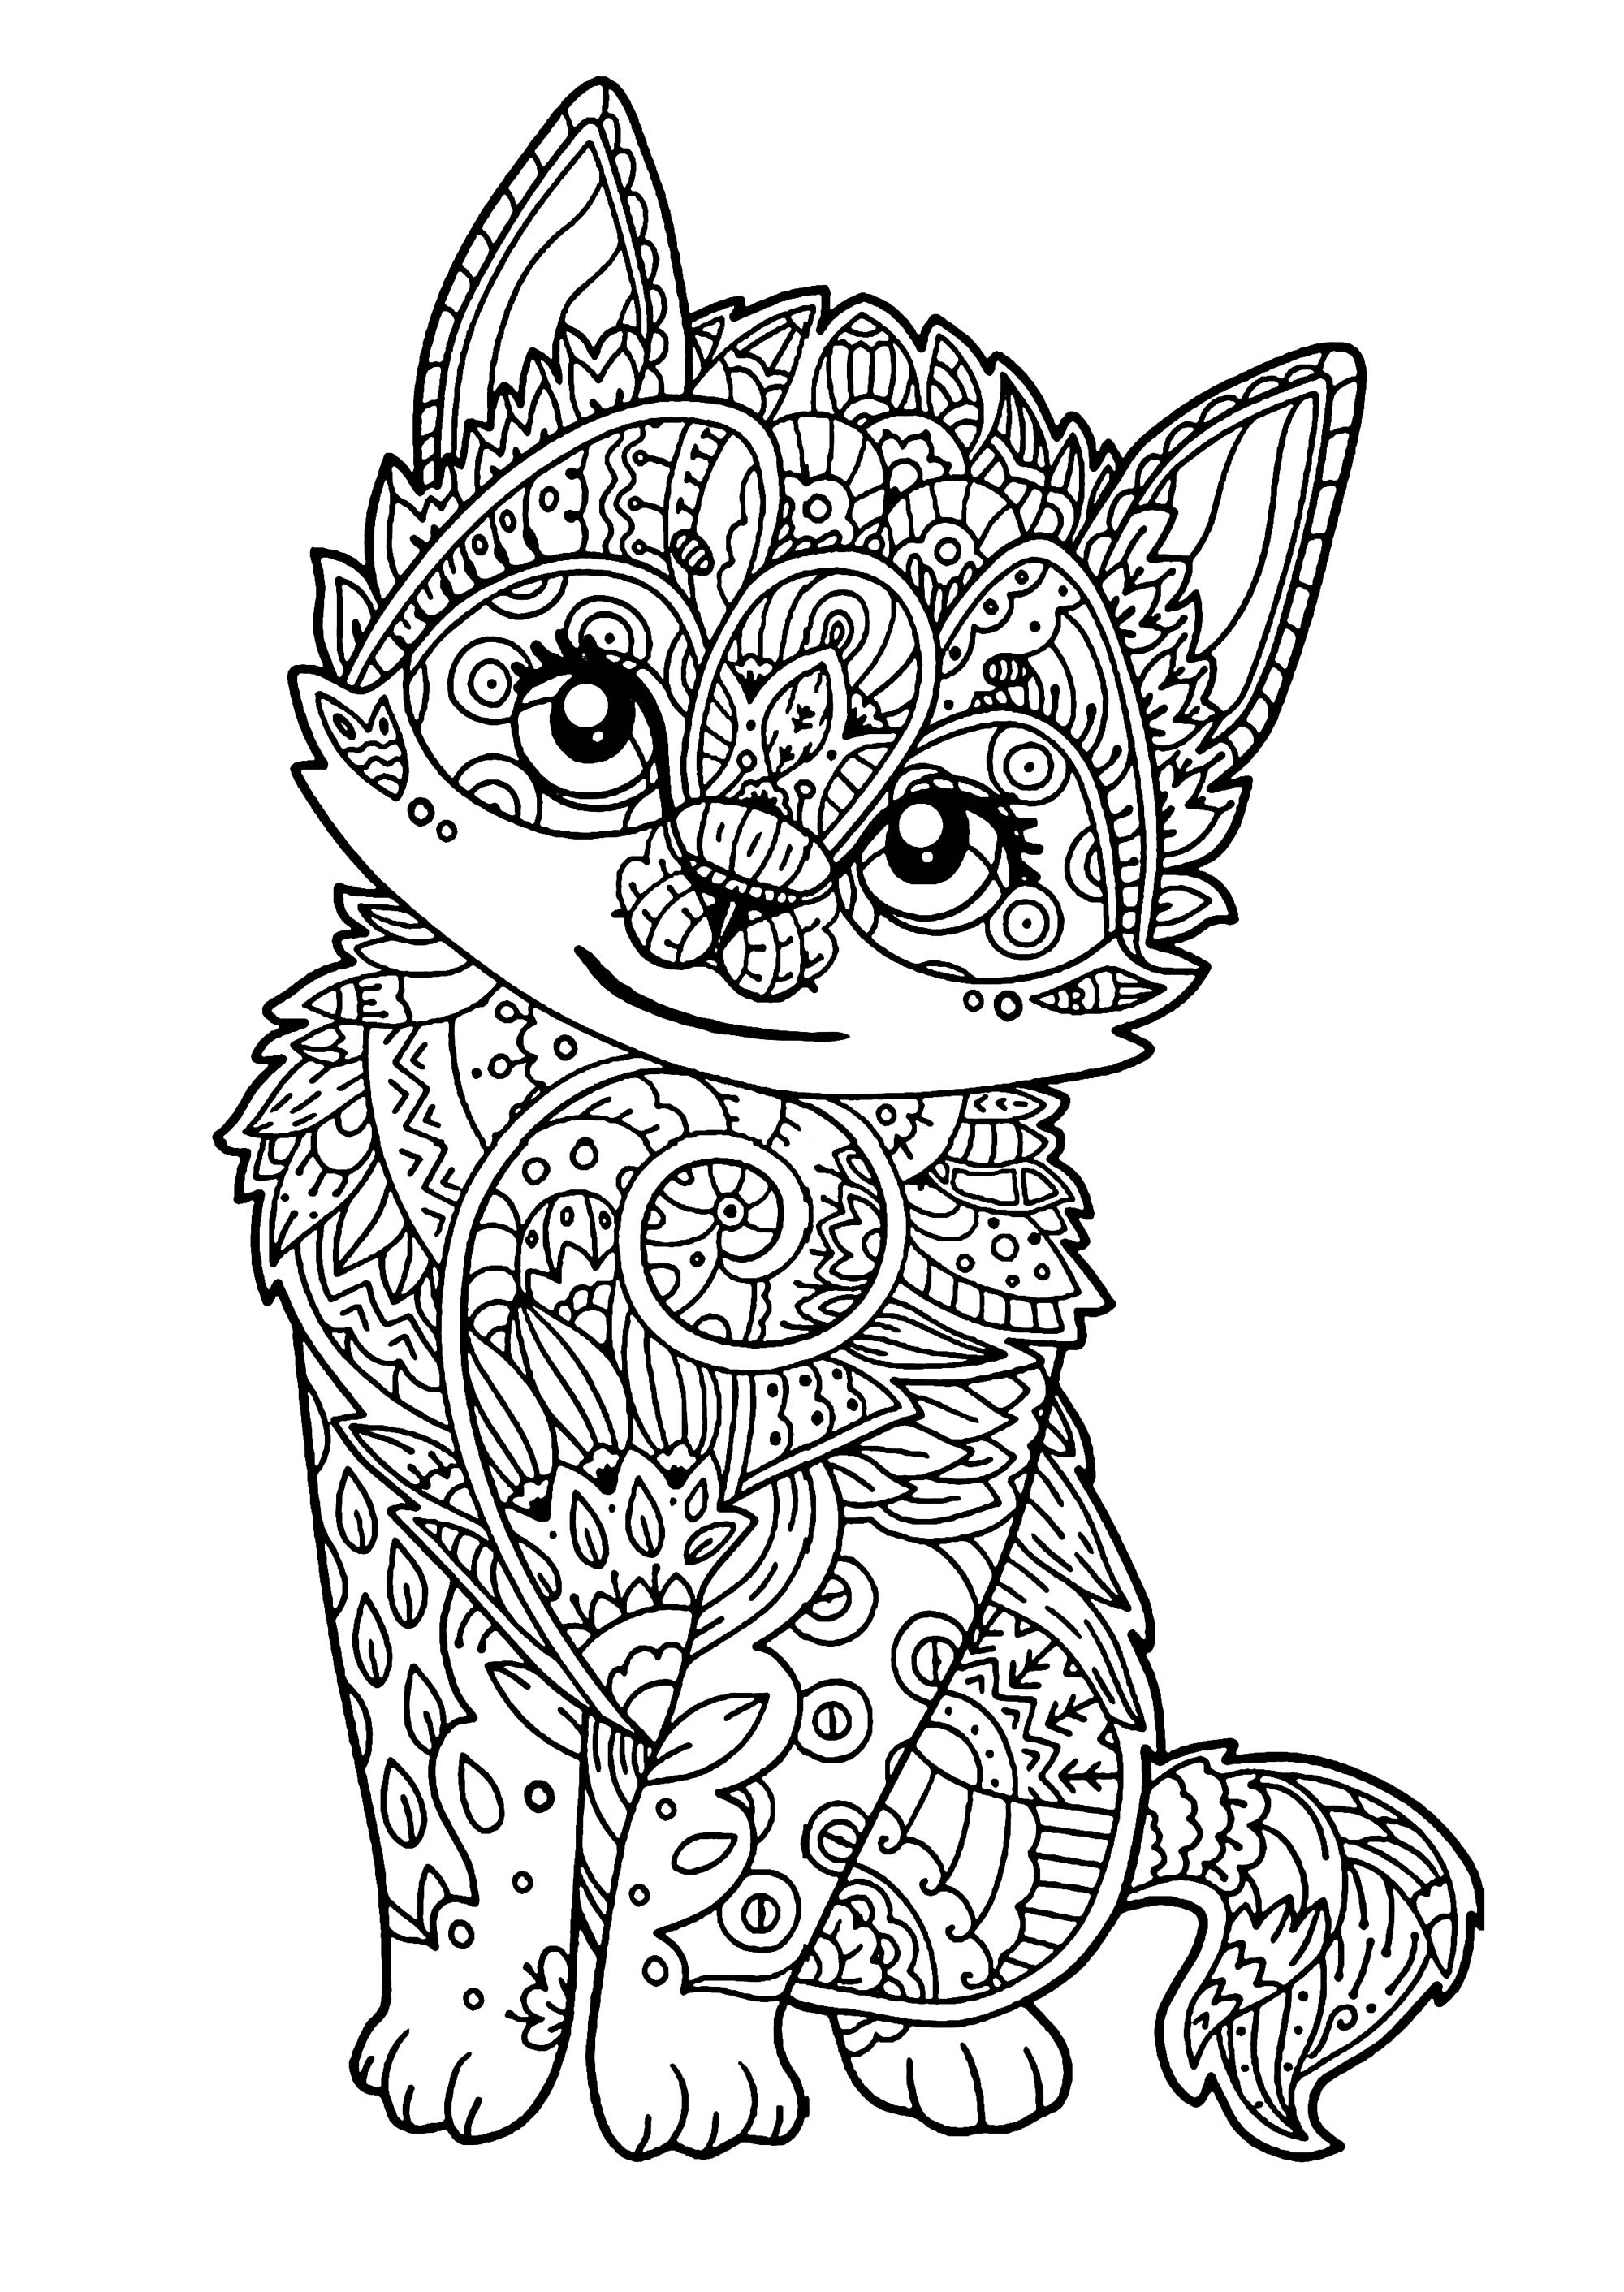 Free cat drawing to download and color - Cats Kids Coloring Pages